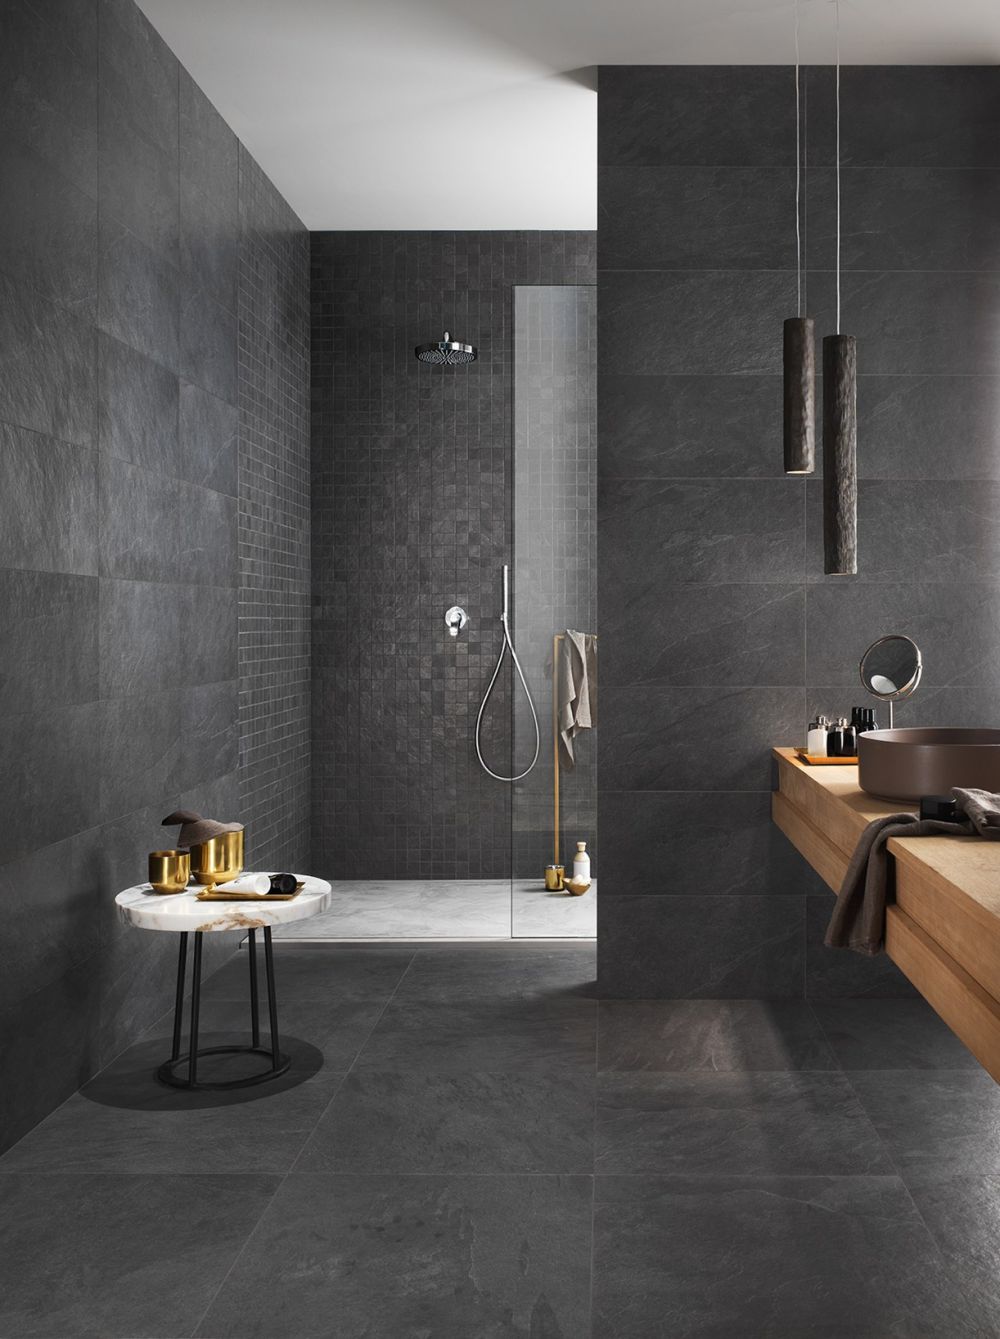 Tips 5 Essential Guide To Design Dramatic Bathrooms In Dark Shades The Design Story